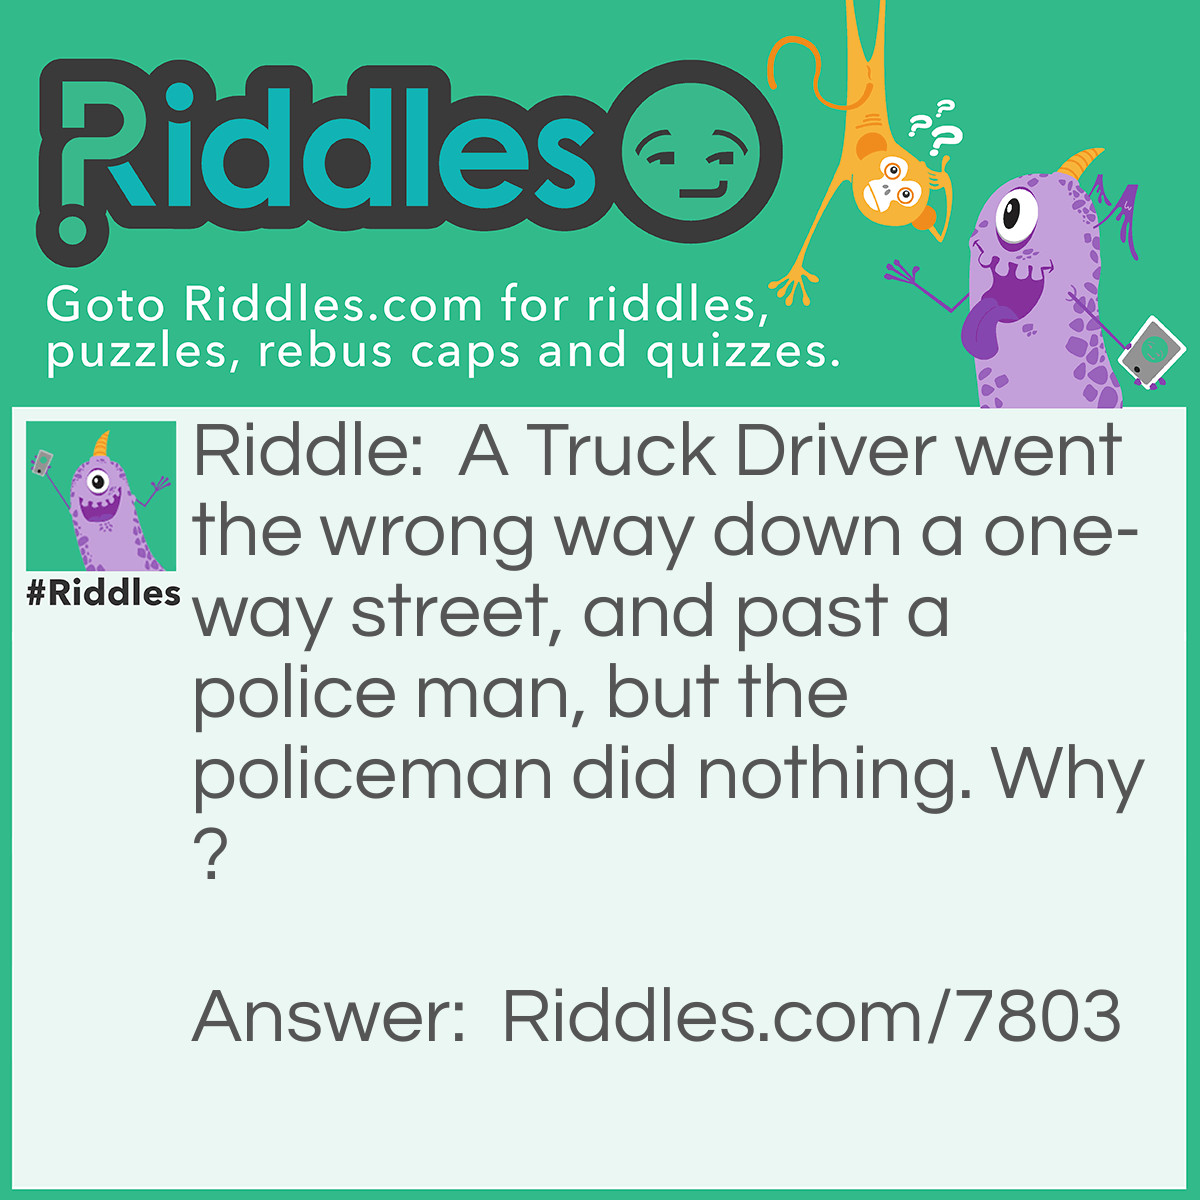 Riddle: A Truck Driver went the wrong way down a one-way street, and past a police man, but the policeman did nothing. Why? Answer: The Truck Driver was walking.